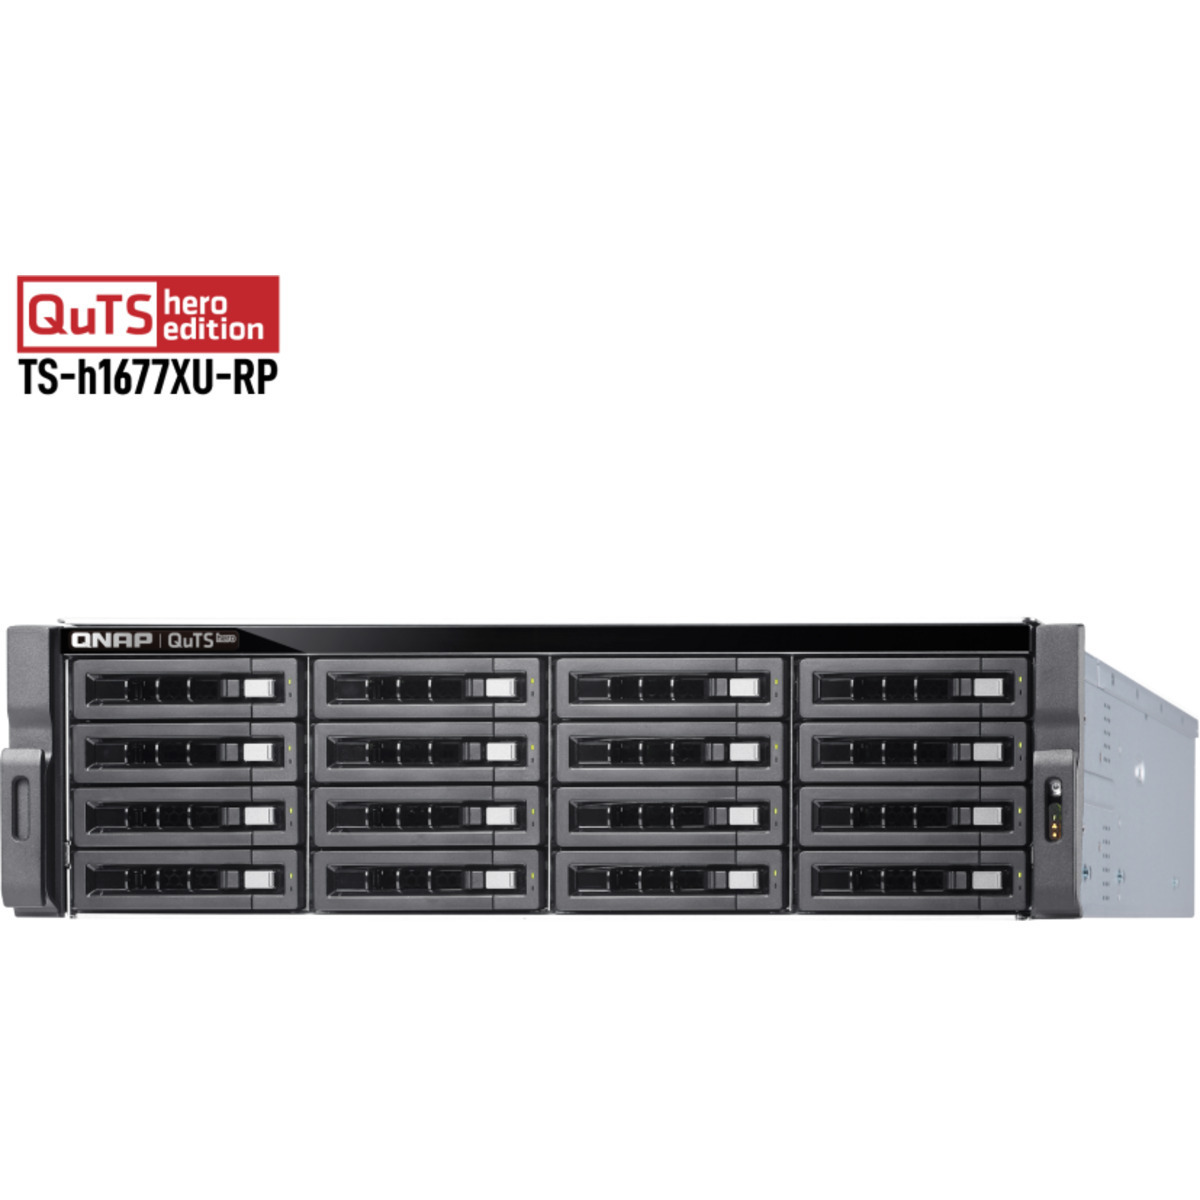 buy $10078 QNAP TS-h1677XU-RP QuTS hero Edition 96tb RackMount NAS - Network Attached Storage Device 16x6000gb Seagate IronWolf Pro ST6000NT001 3.5 7200rpm SATA 6Gb/s HDD NAS Class Drives Installed - Burn-In Tested - nas headquarters buy network attached storage server device das new raid-5 free shipping simply usa TS-h1677XU-RP QuTS hero Edition